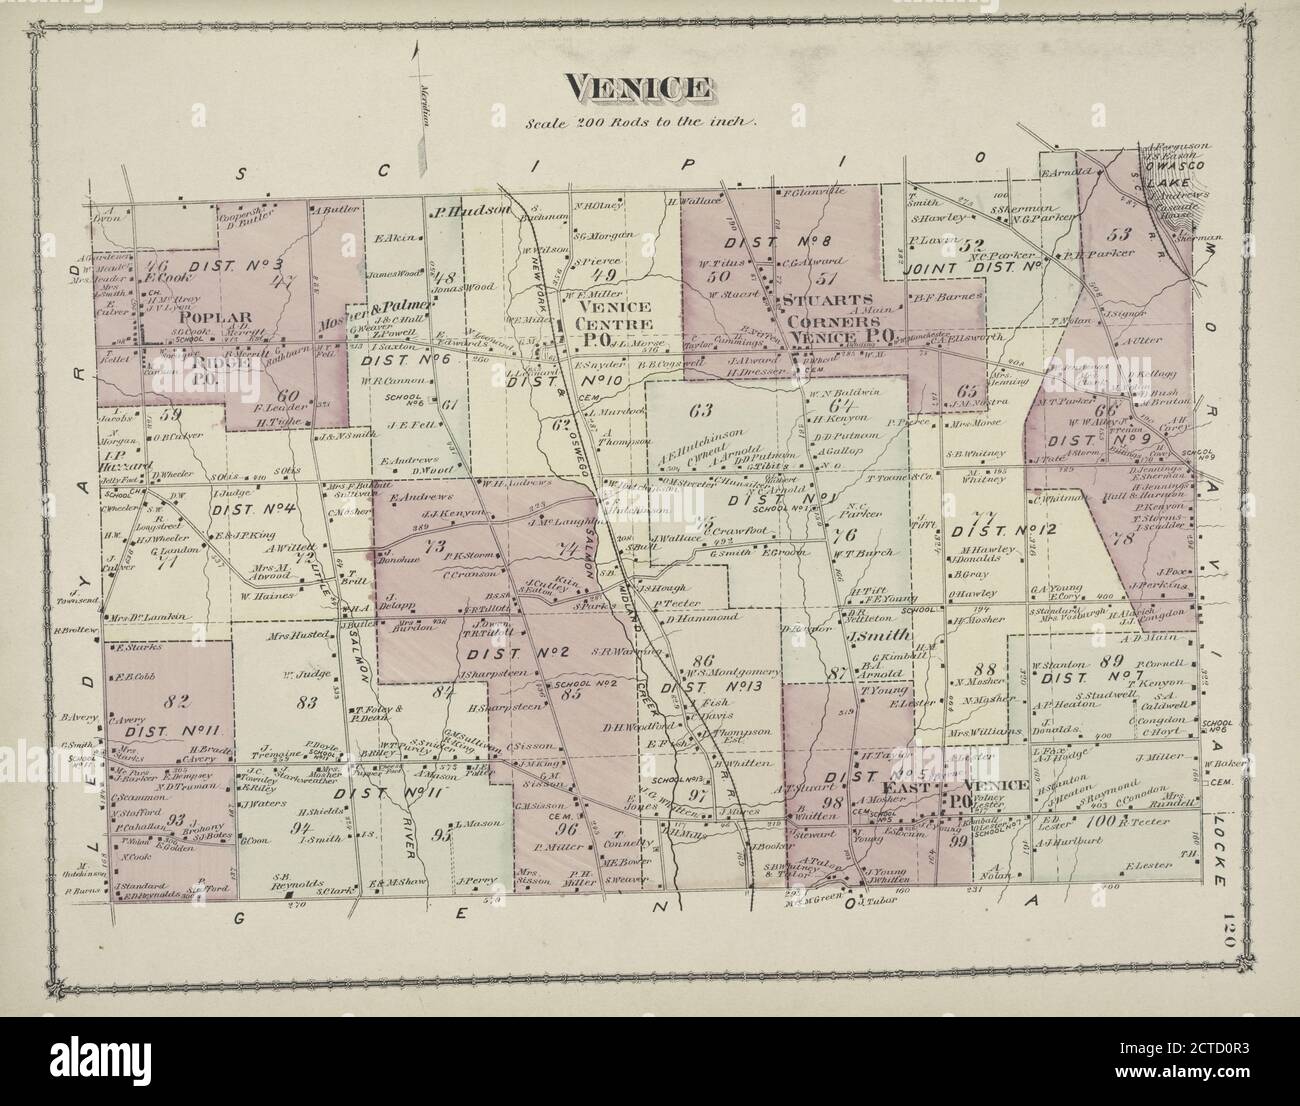 Venice Township, cartografia, Atlases, 1875, Beers, F. W. (Frederick W.), J.B. Beers & Co Foto Stock